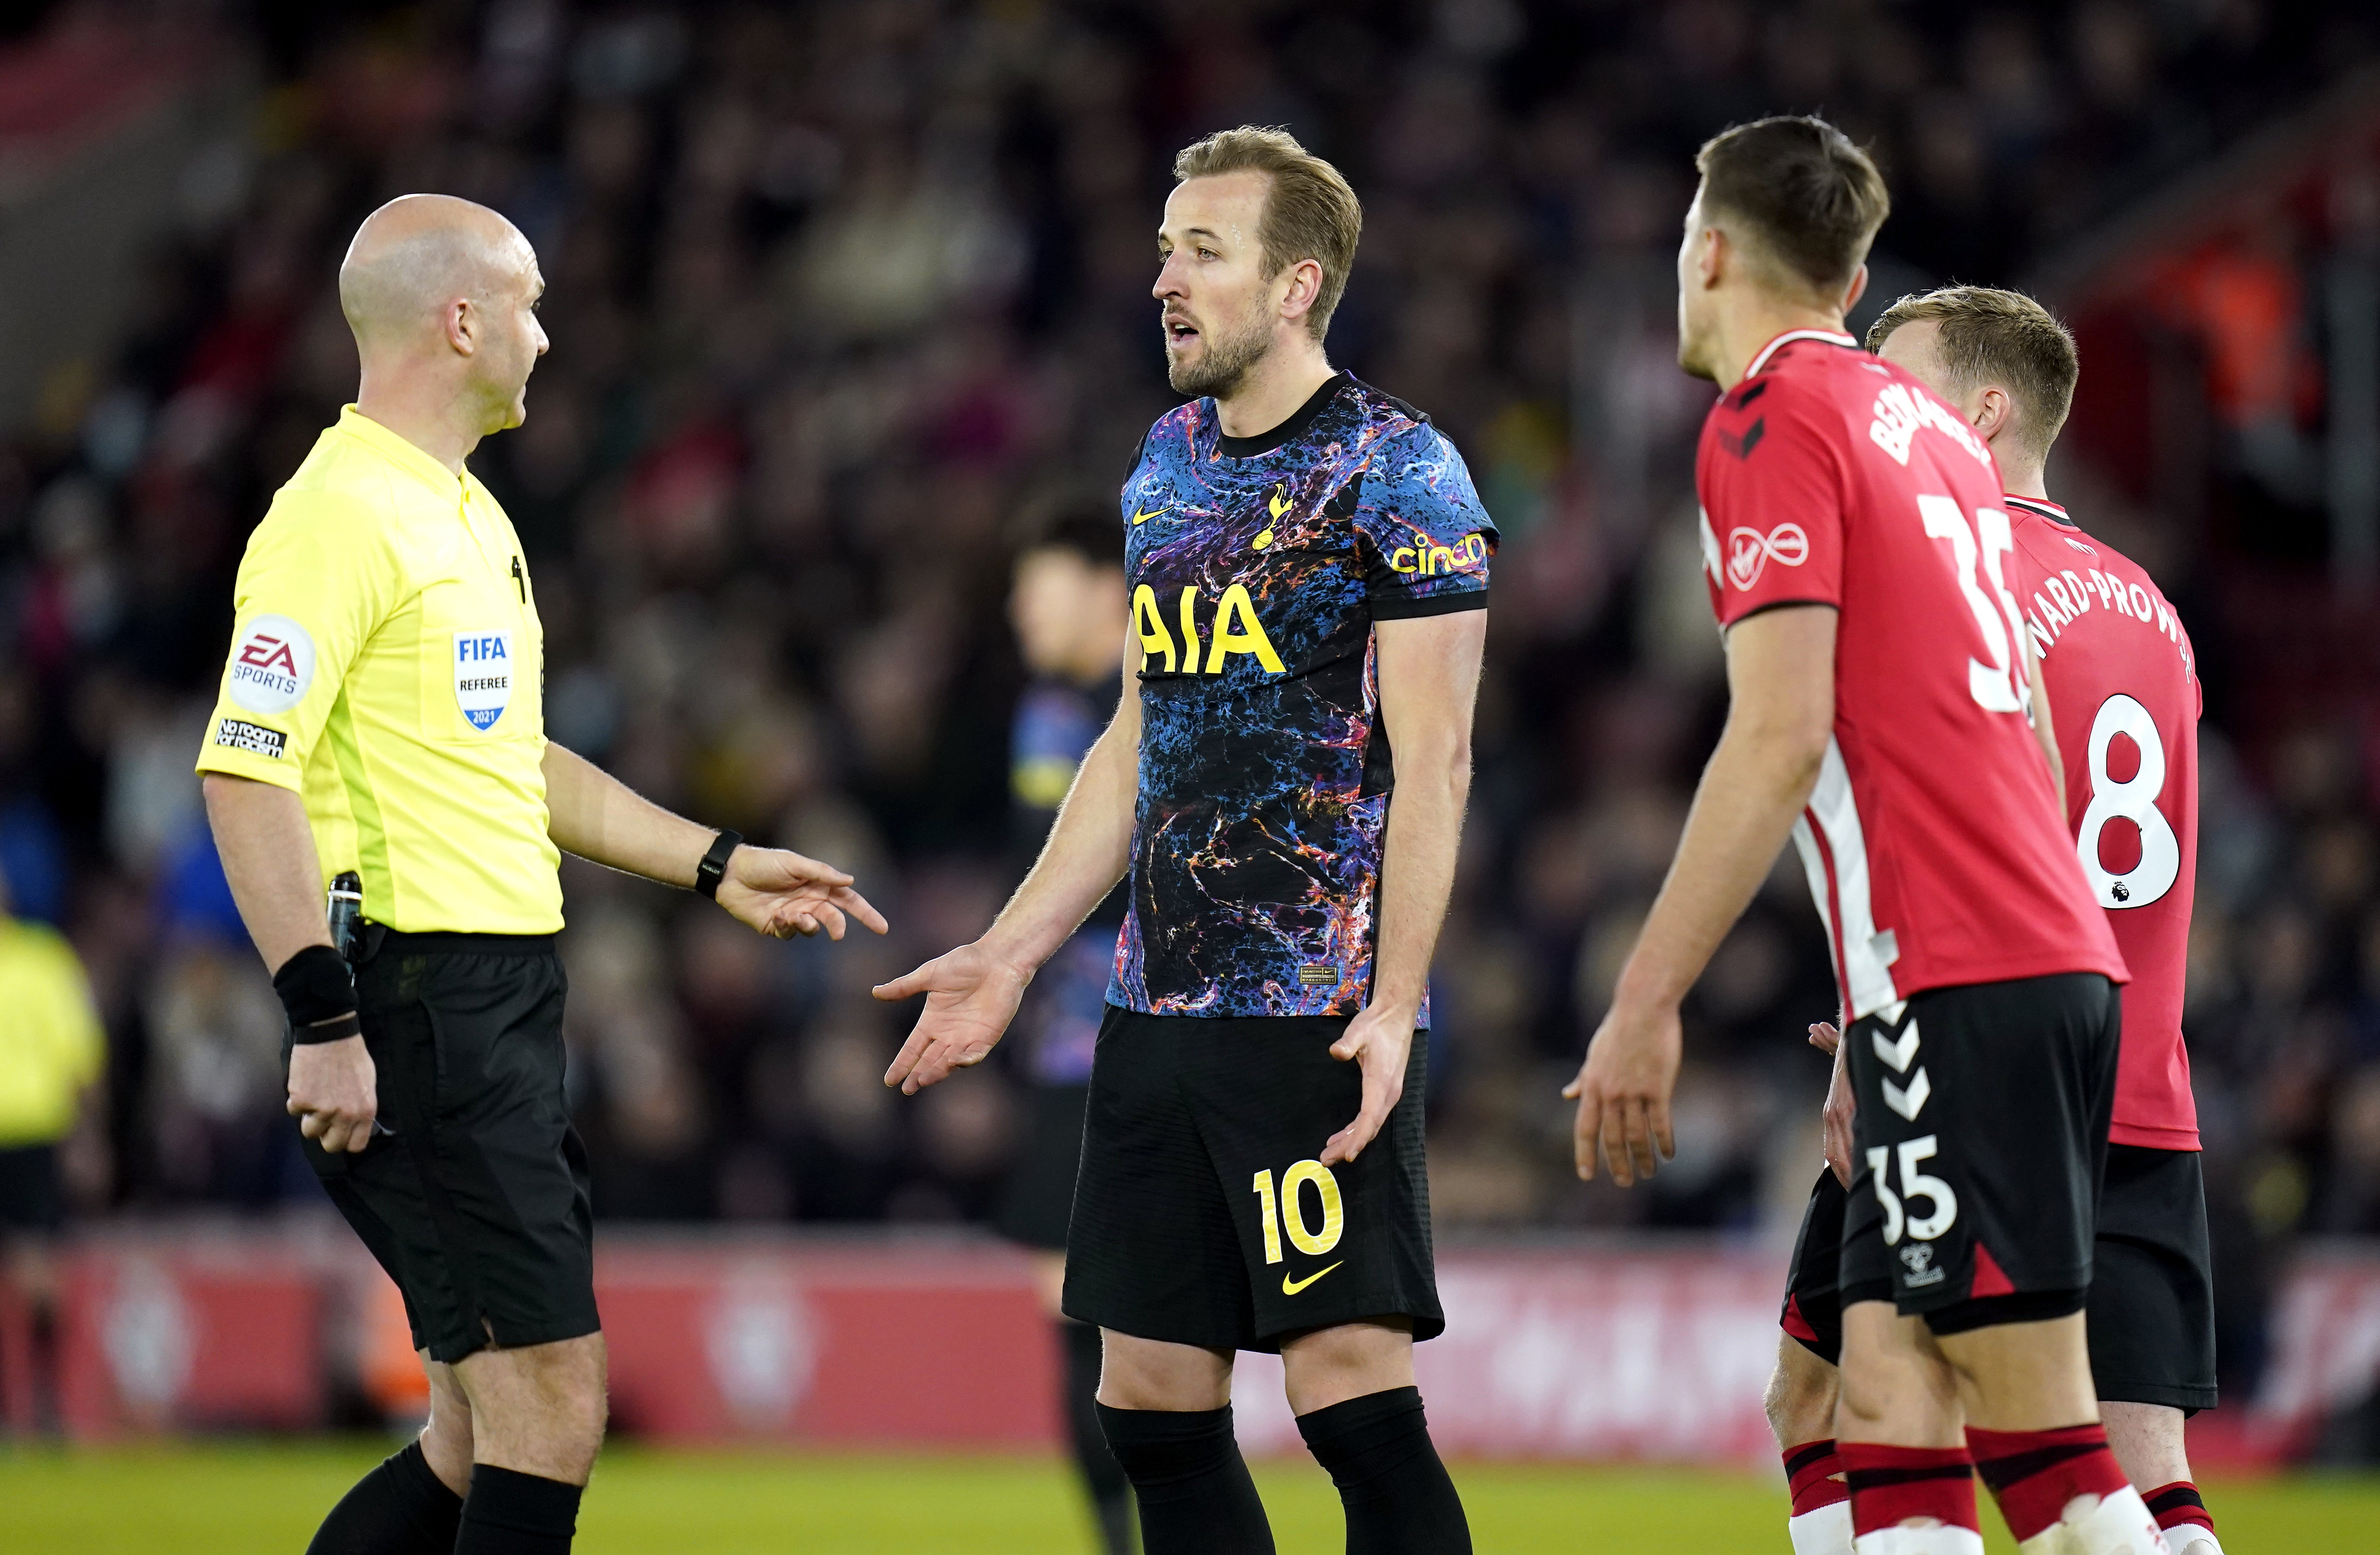 Harry Kane had a goal ruled out for offside as Tottenham were held to a 1-1 draw at Southampton (Andrew Matthews/PA)